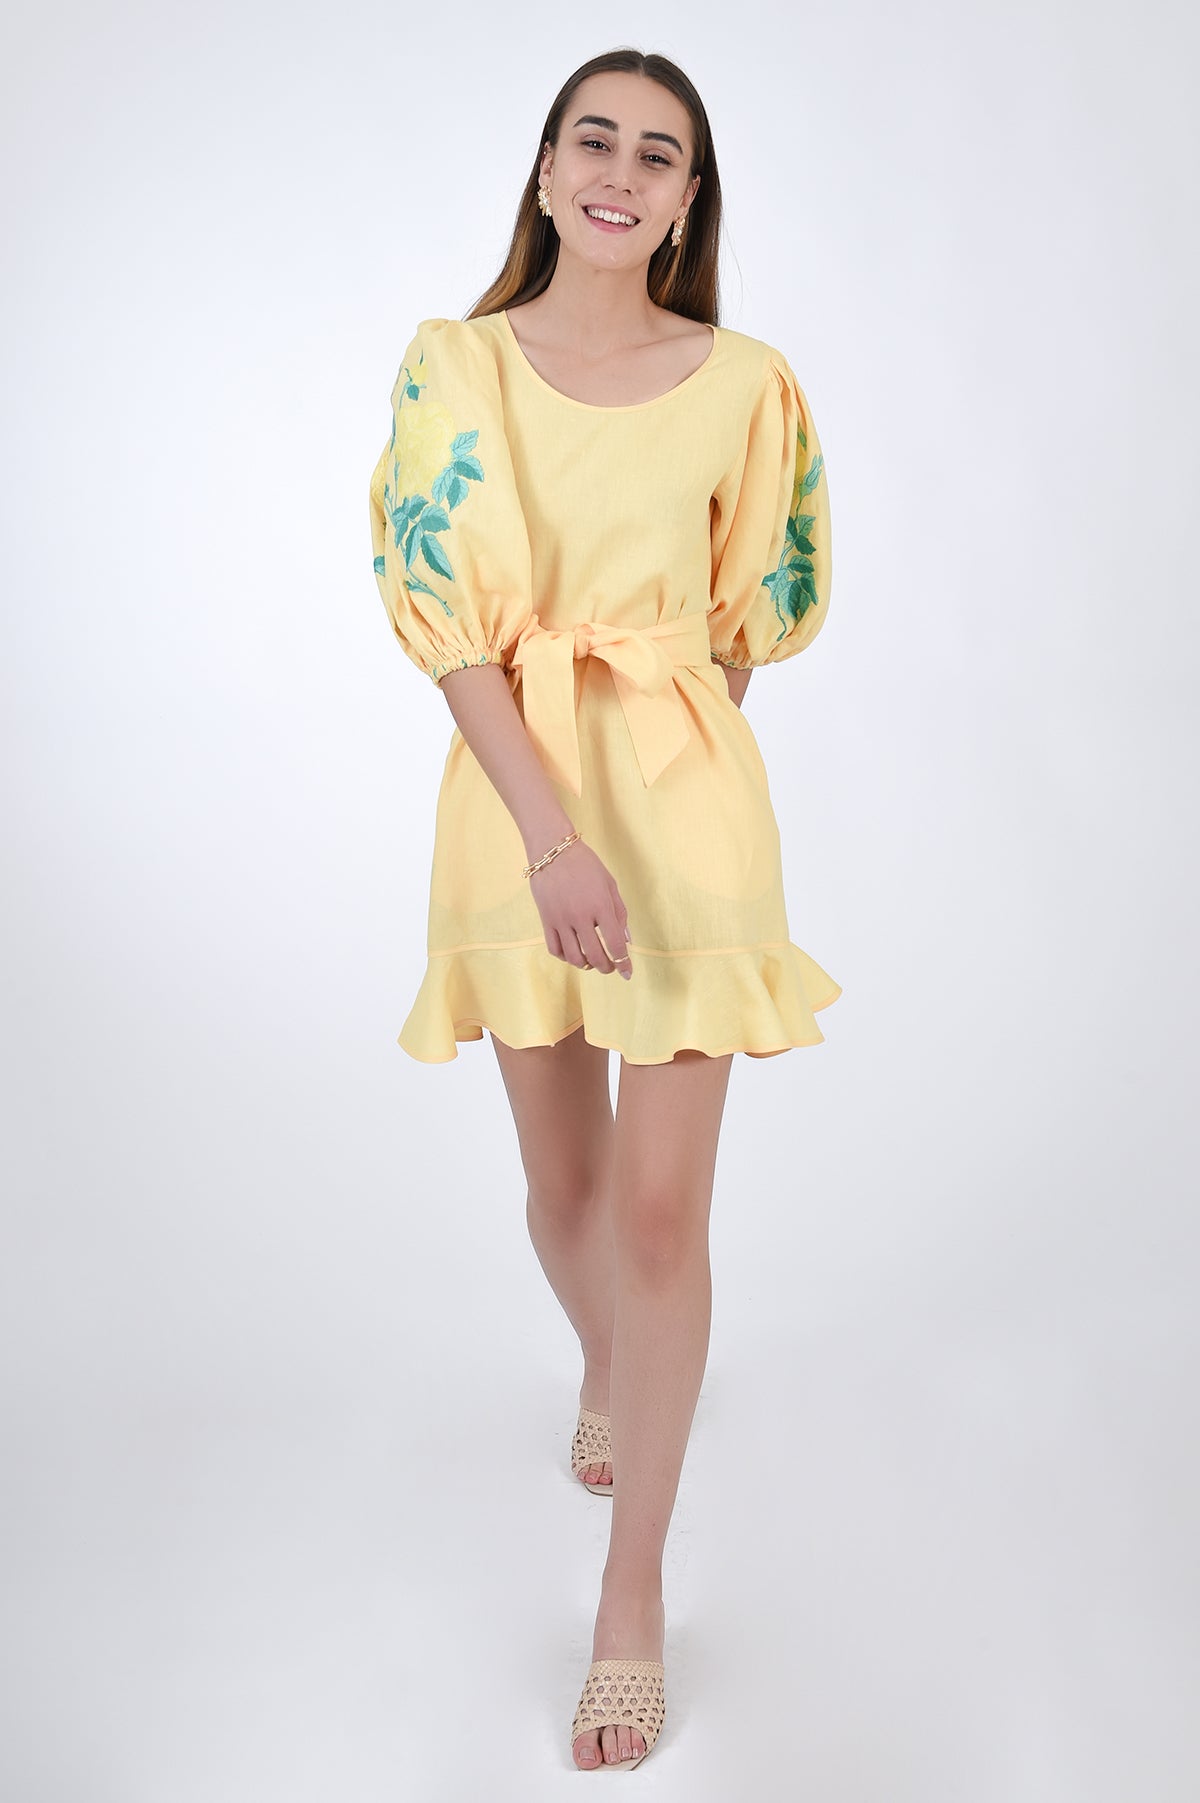 Naril Linen Dress with Puff Sleeve and Ruffle Hem Details, Front VIew.